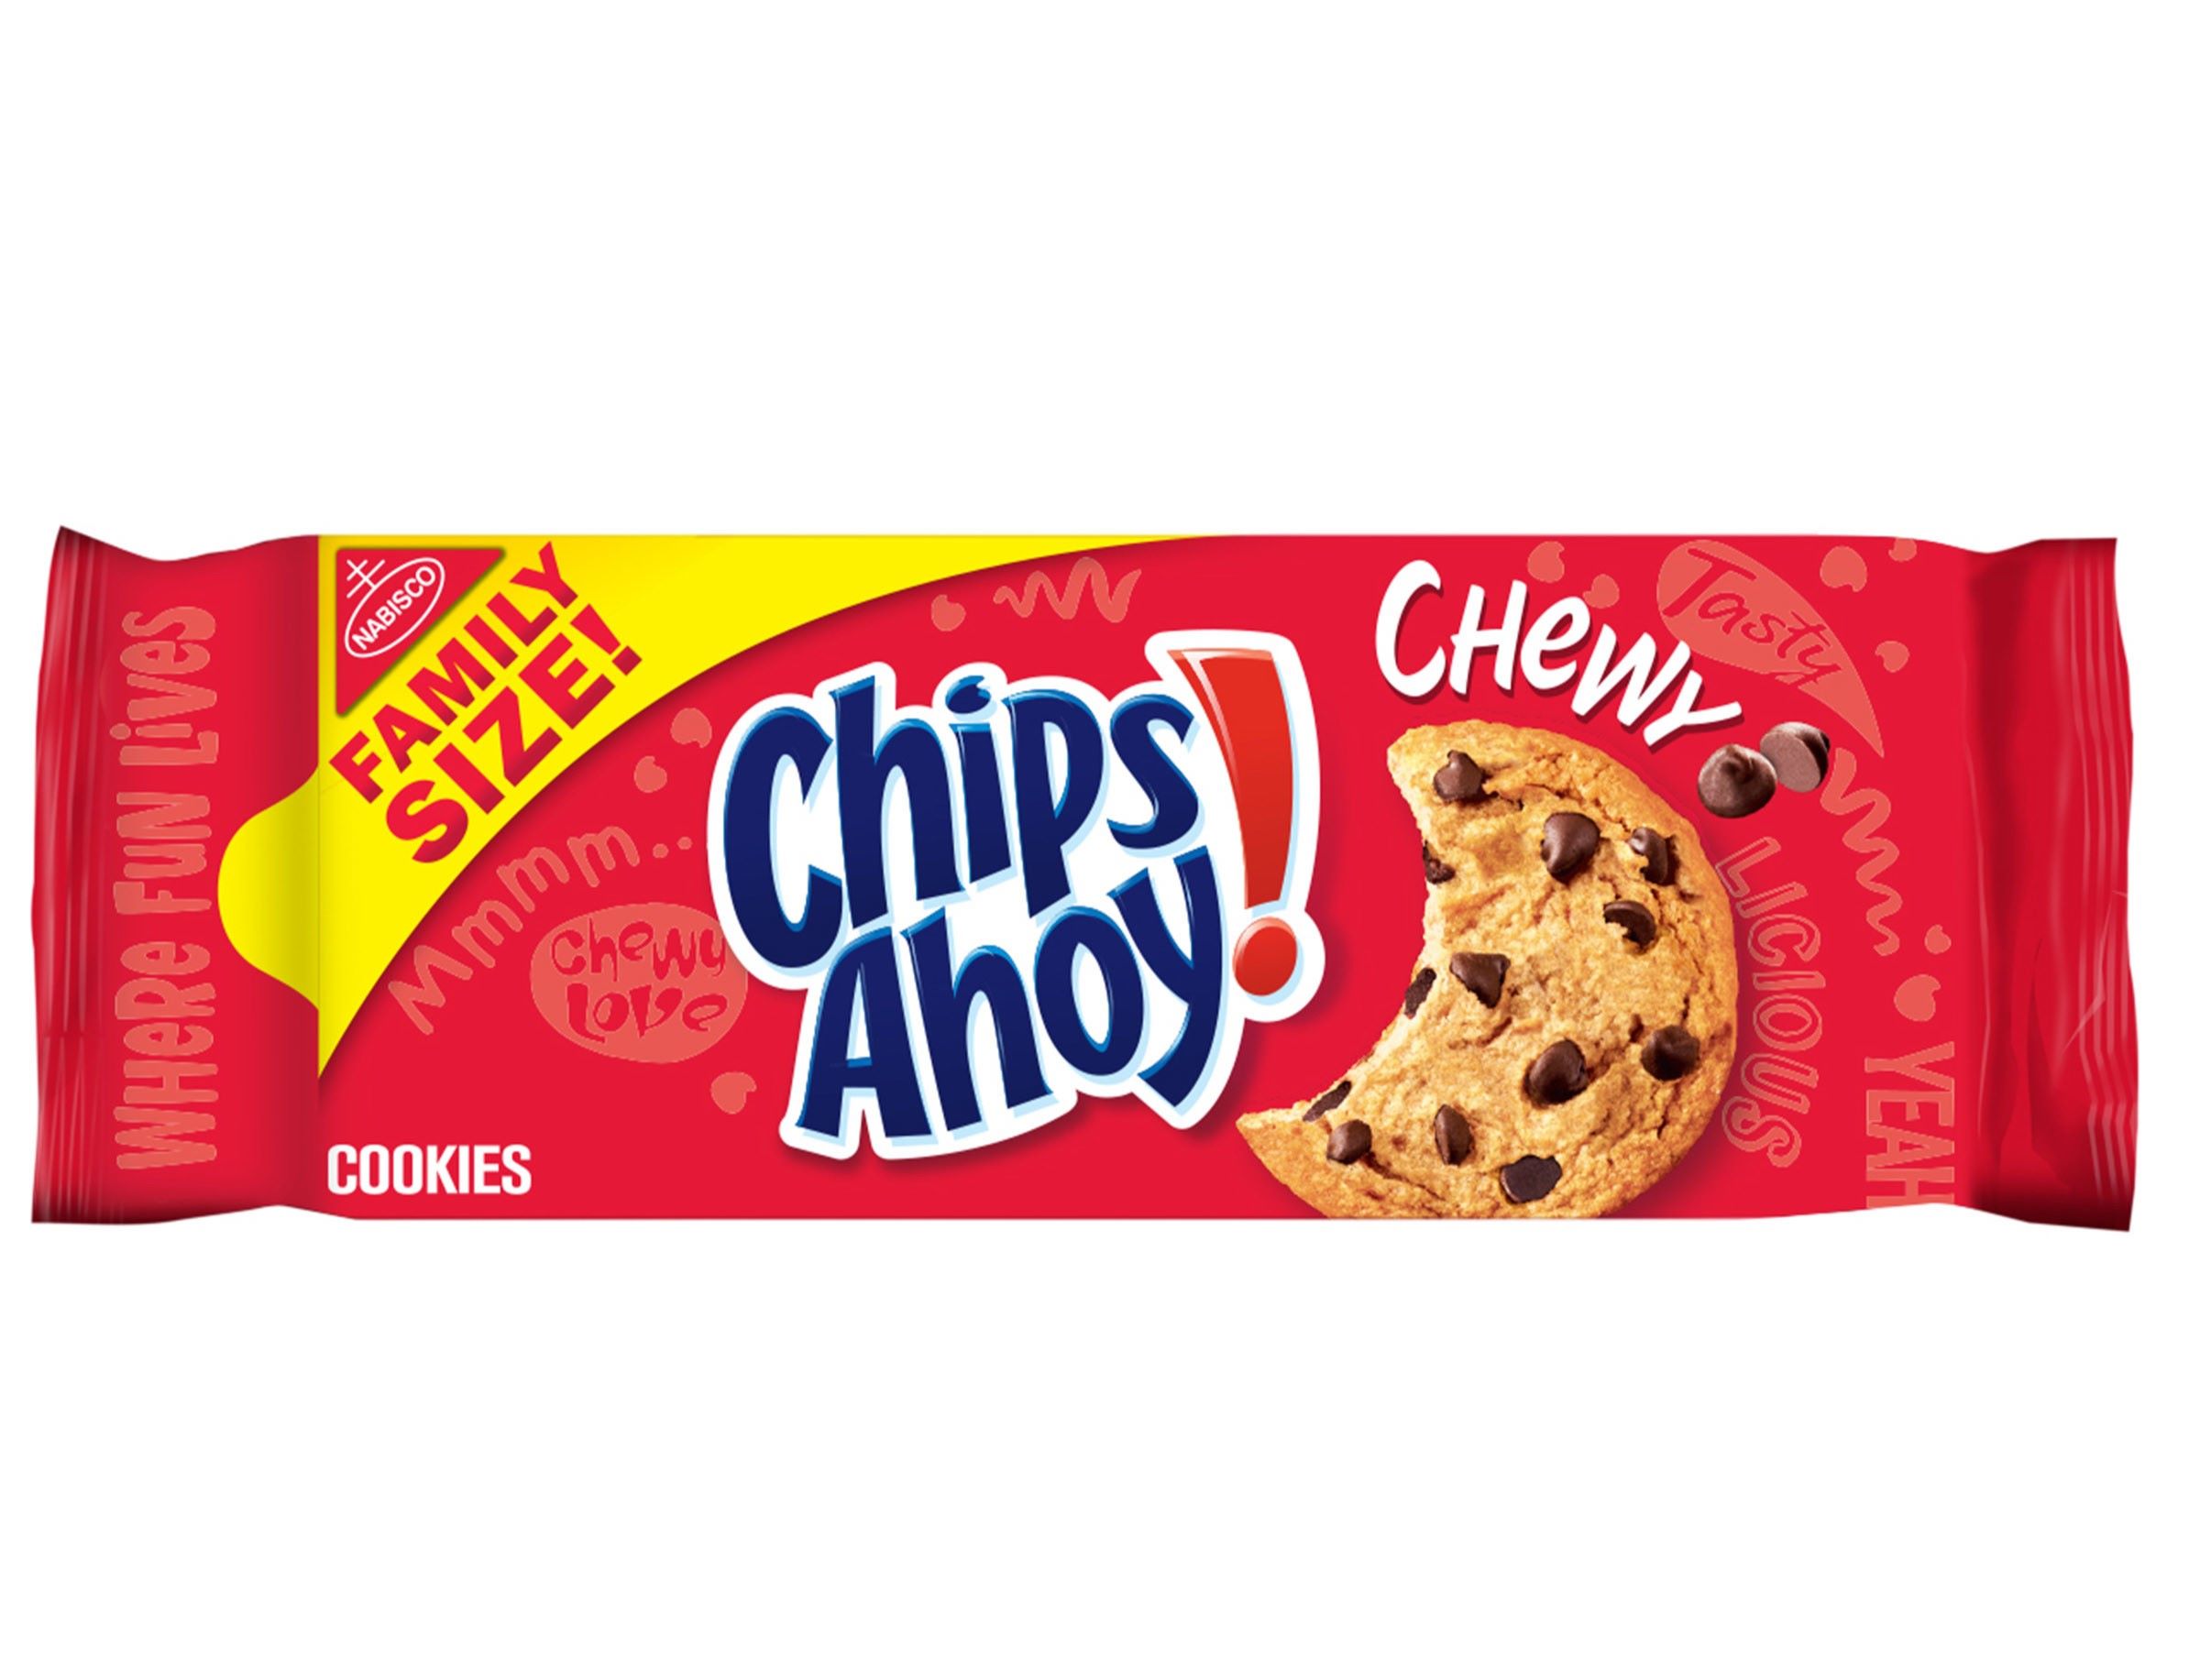 15-chewy-chips-ahoy-nutrition-facts